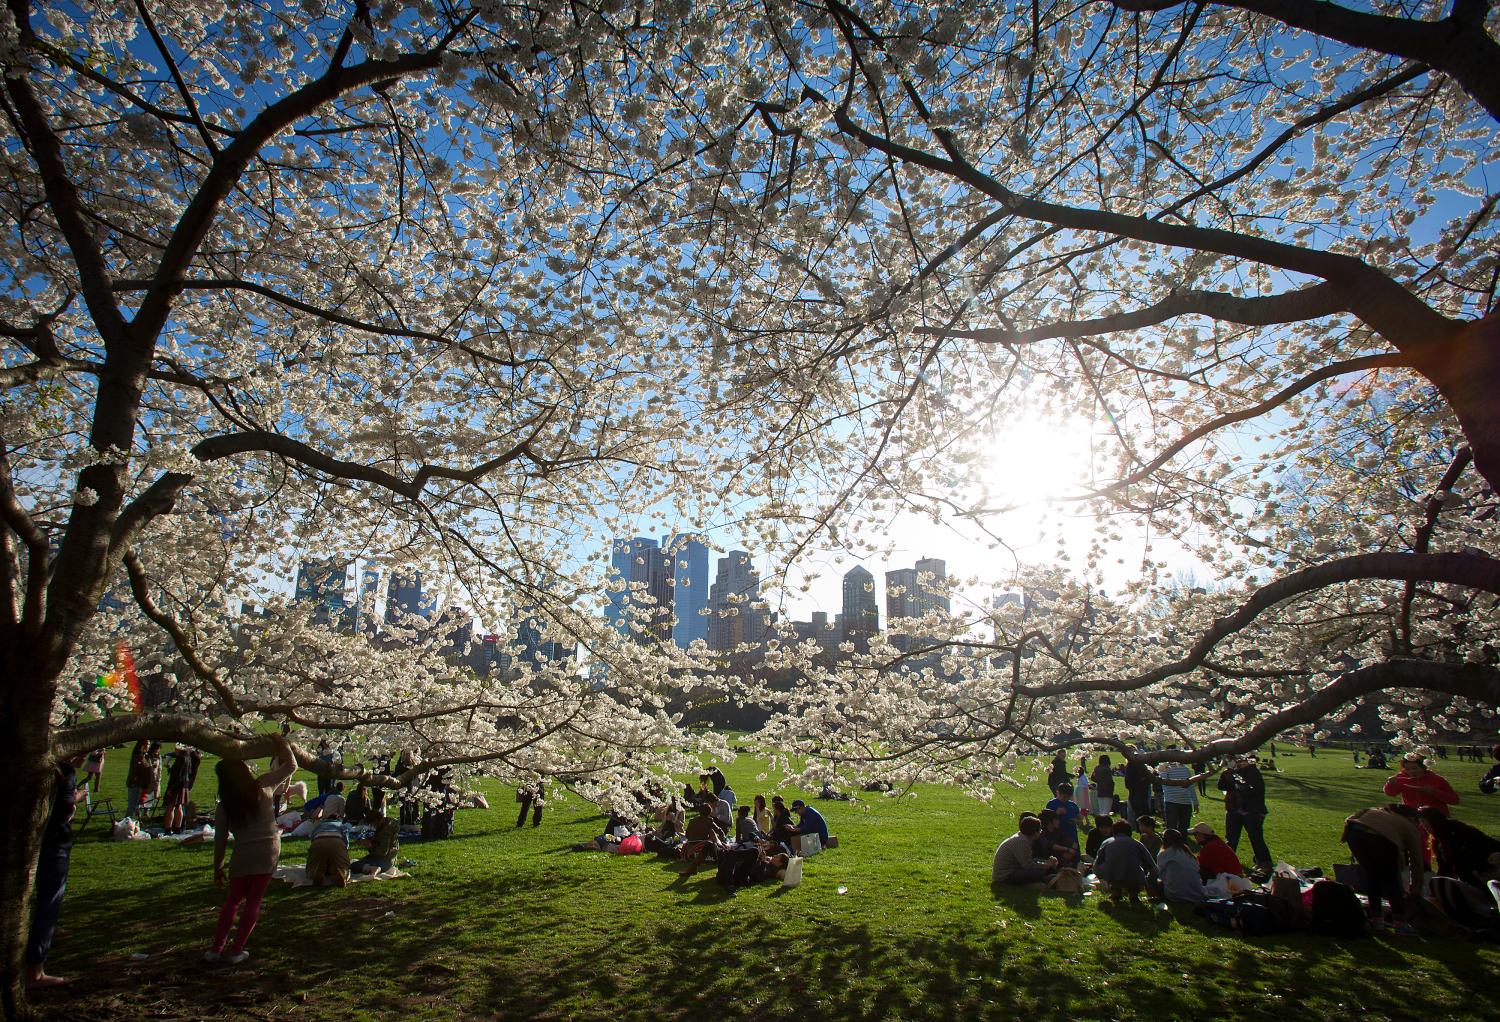 People gather near cherry trees in full blossom in Central Park in New York April 20, 2014. REUTERS/Carlo Allegri (UNITED STATES - Tags: SOCIETY ENVIRONMENT) - GM1EA4L0PK001